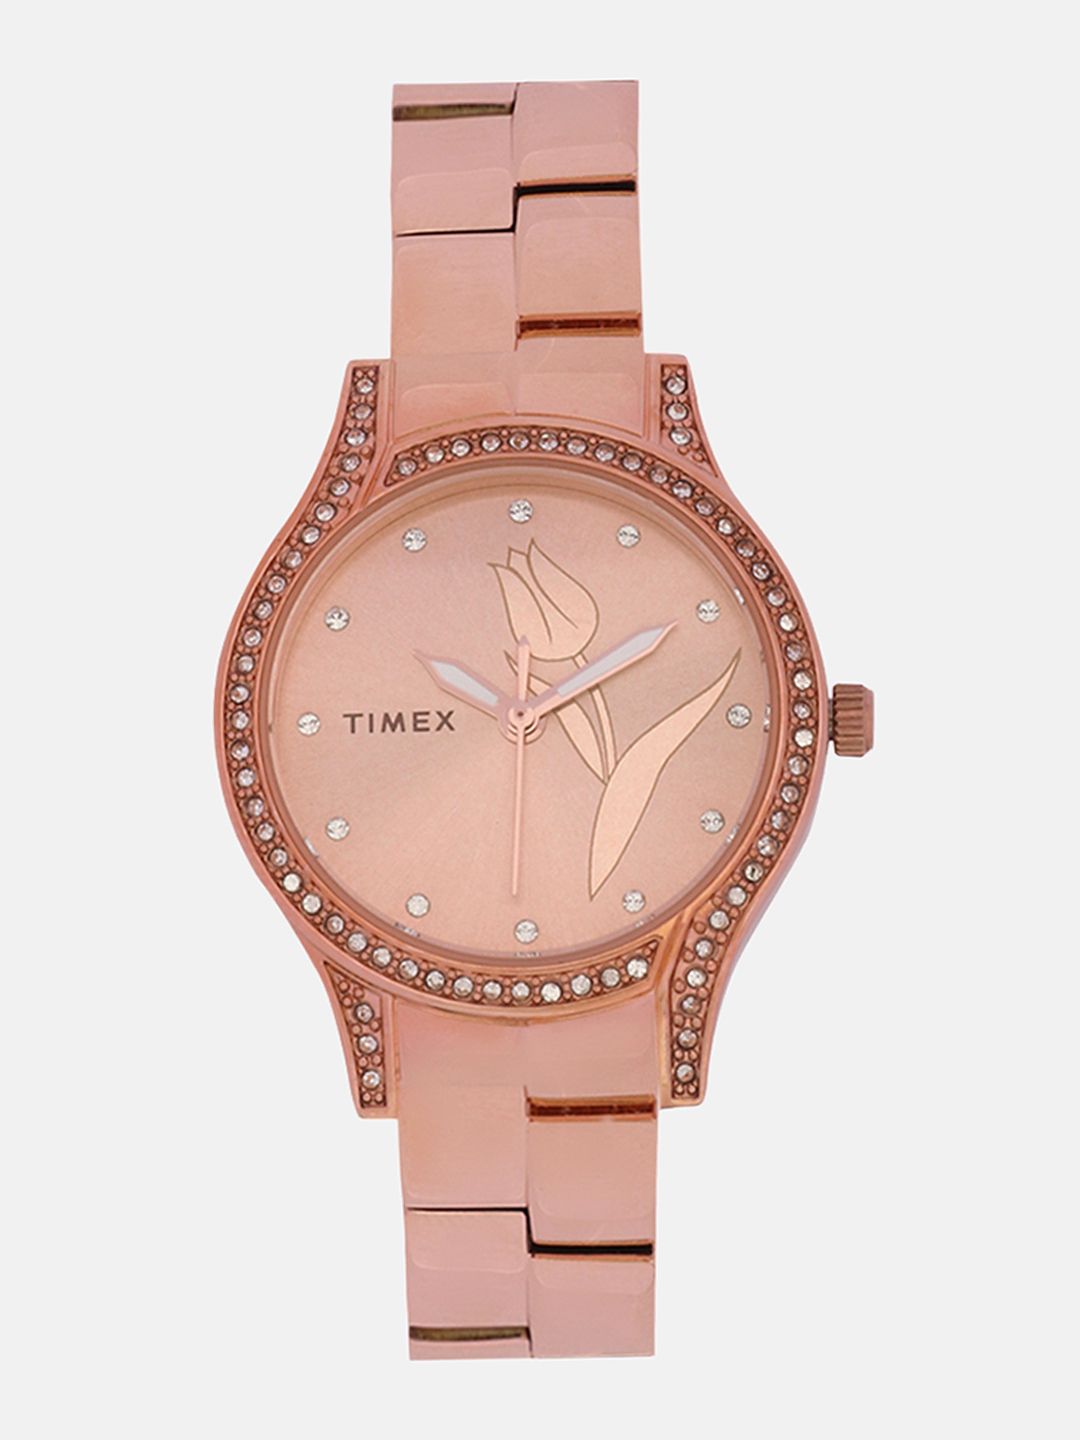 Timex Women Rose Gold-Toned Analogue Watch - TW0TL9503 Price in India